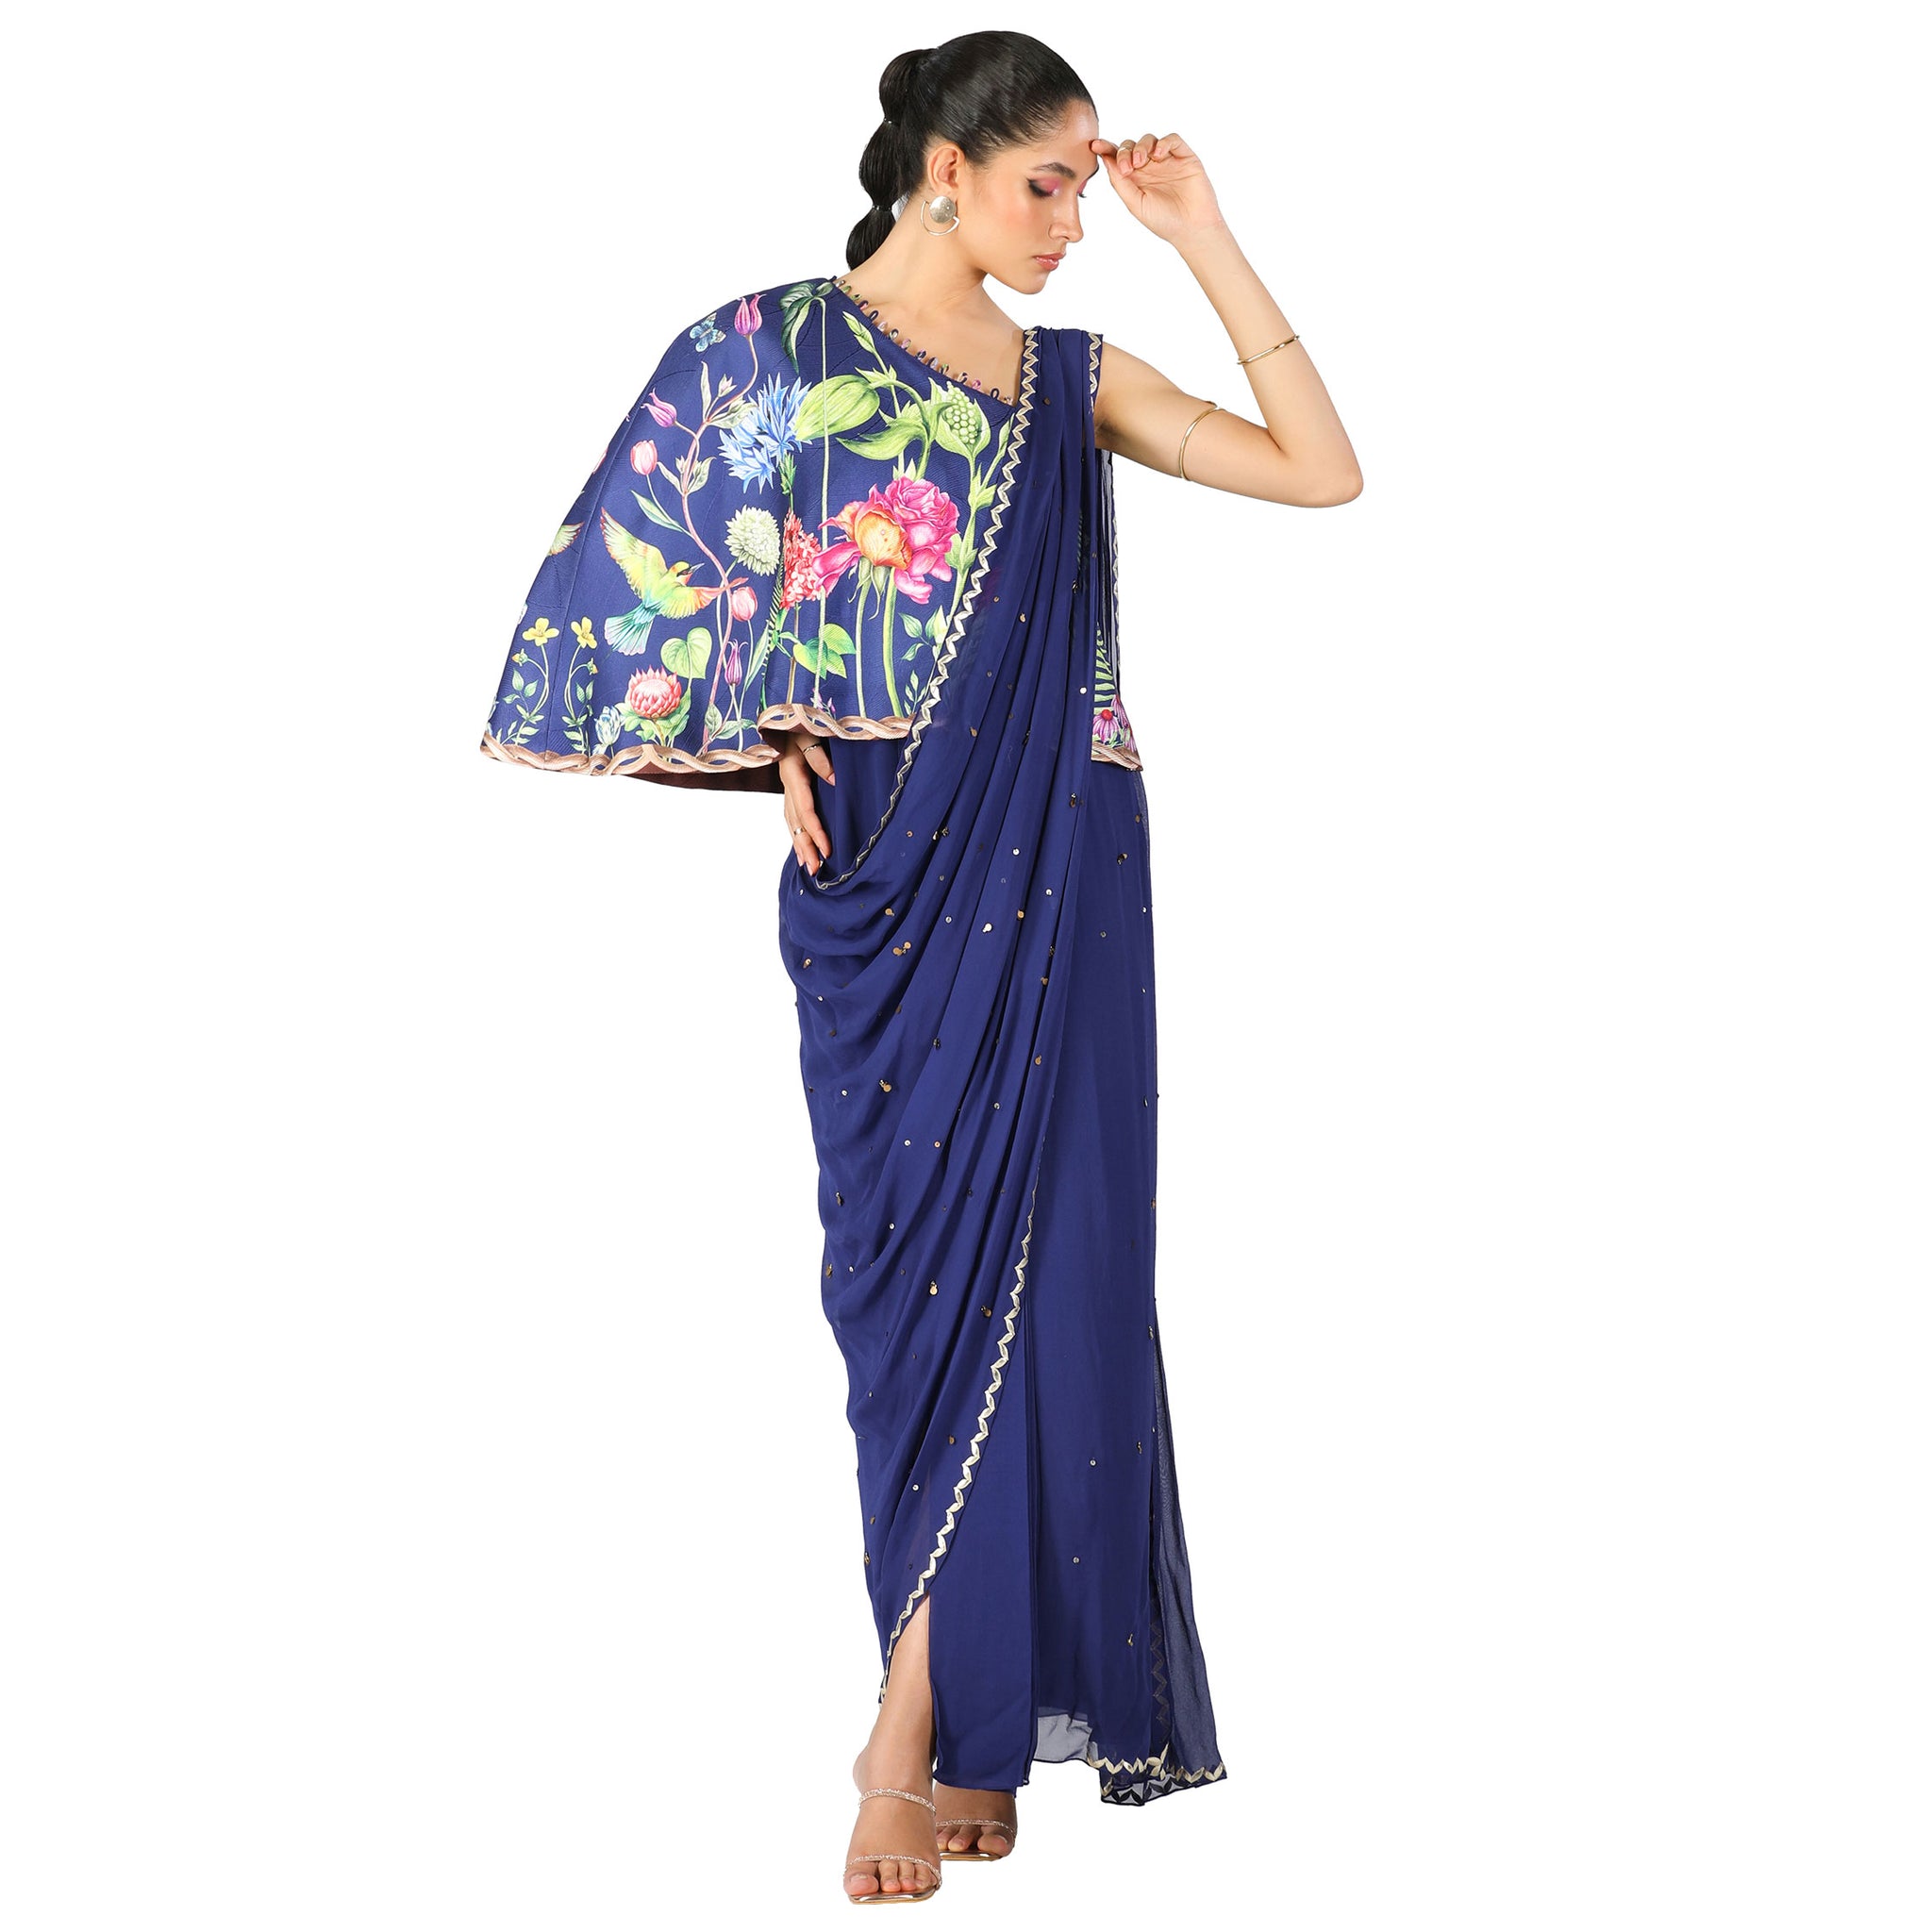 Embroidered Sari Gown